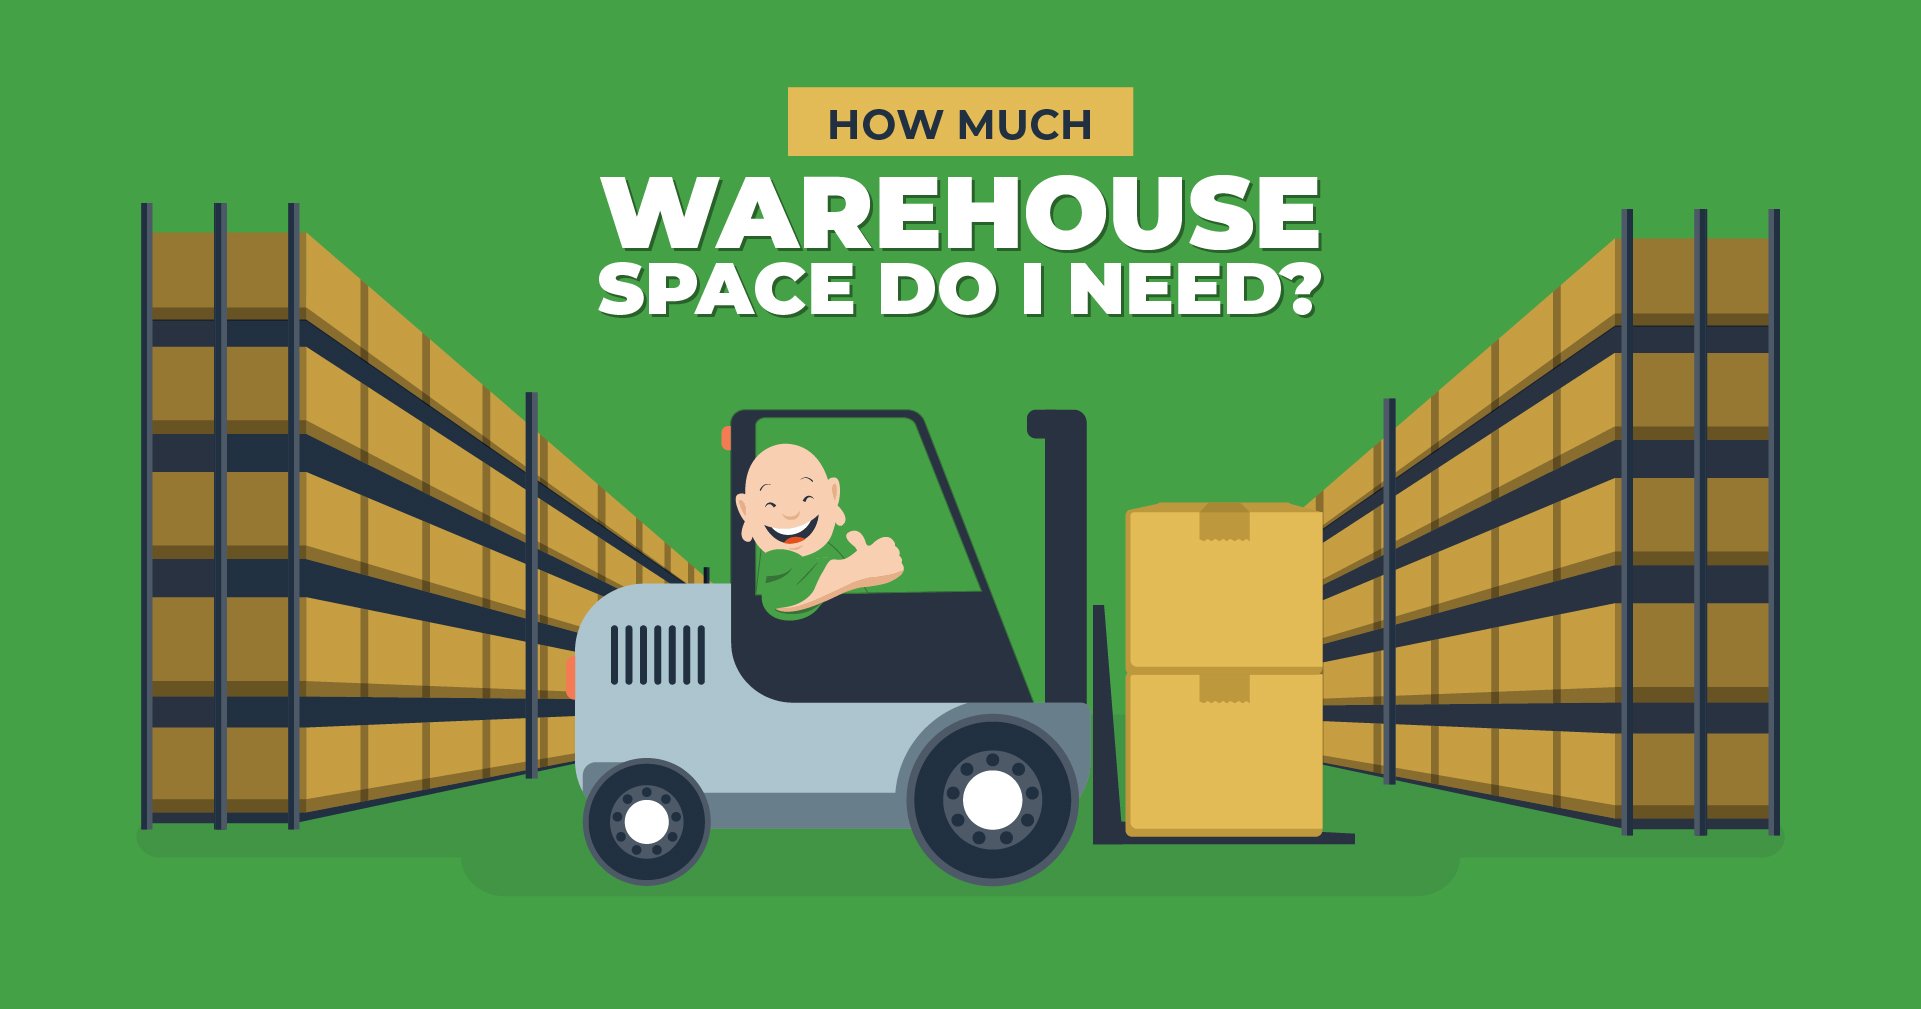 How Much Warehouse Space Do I Need?